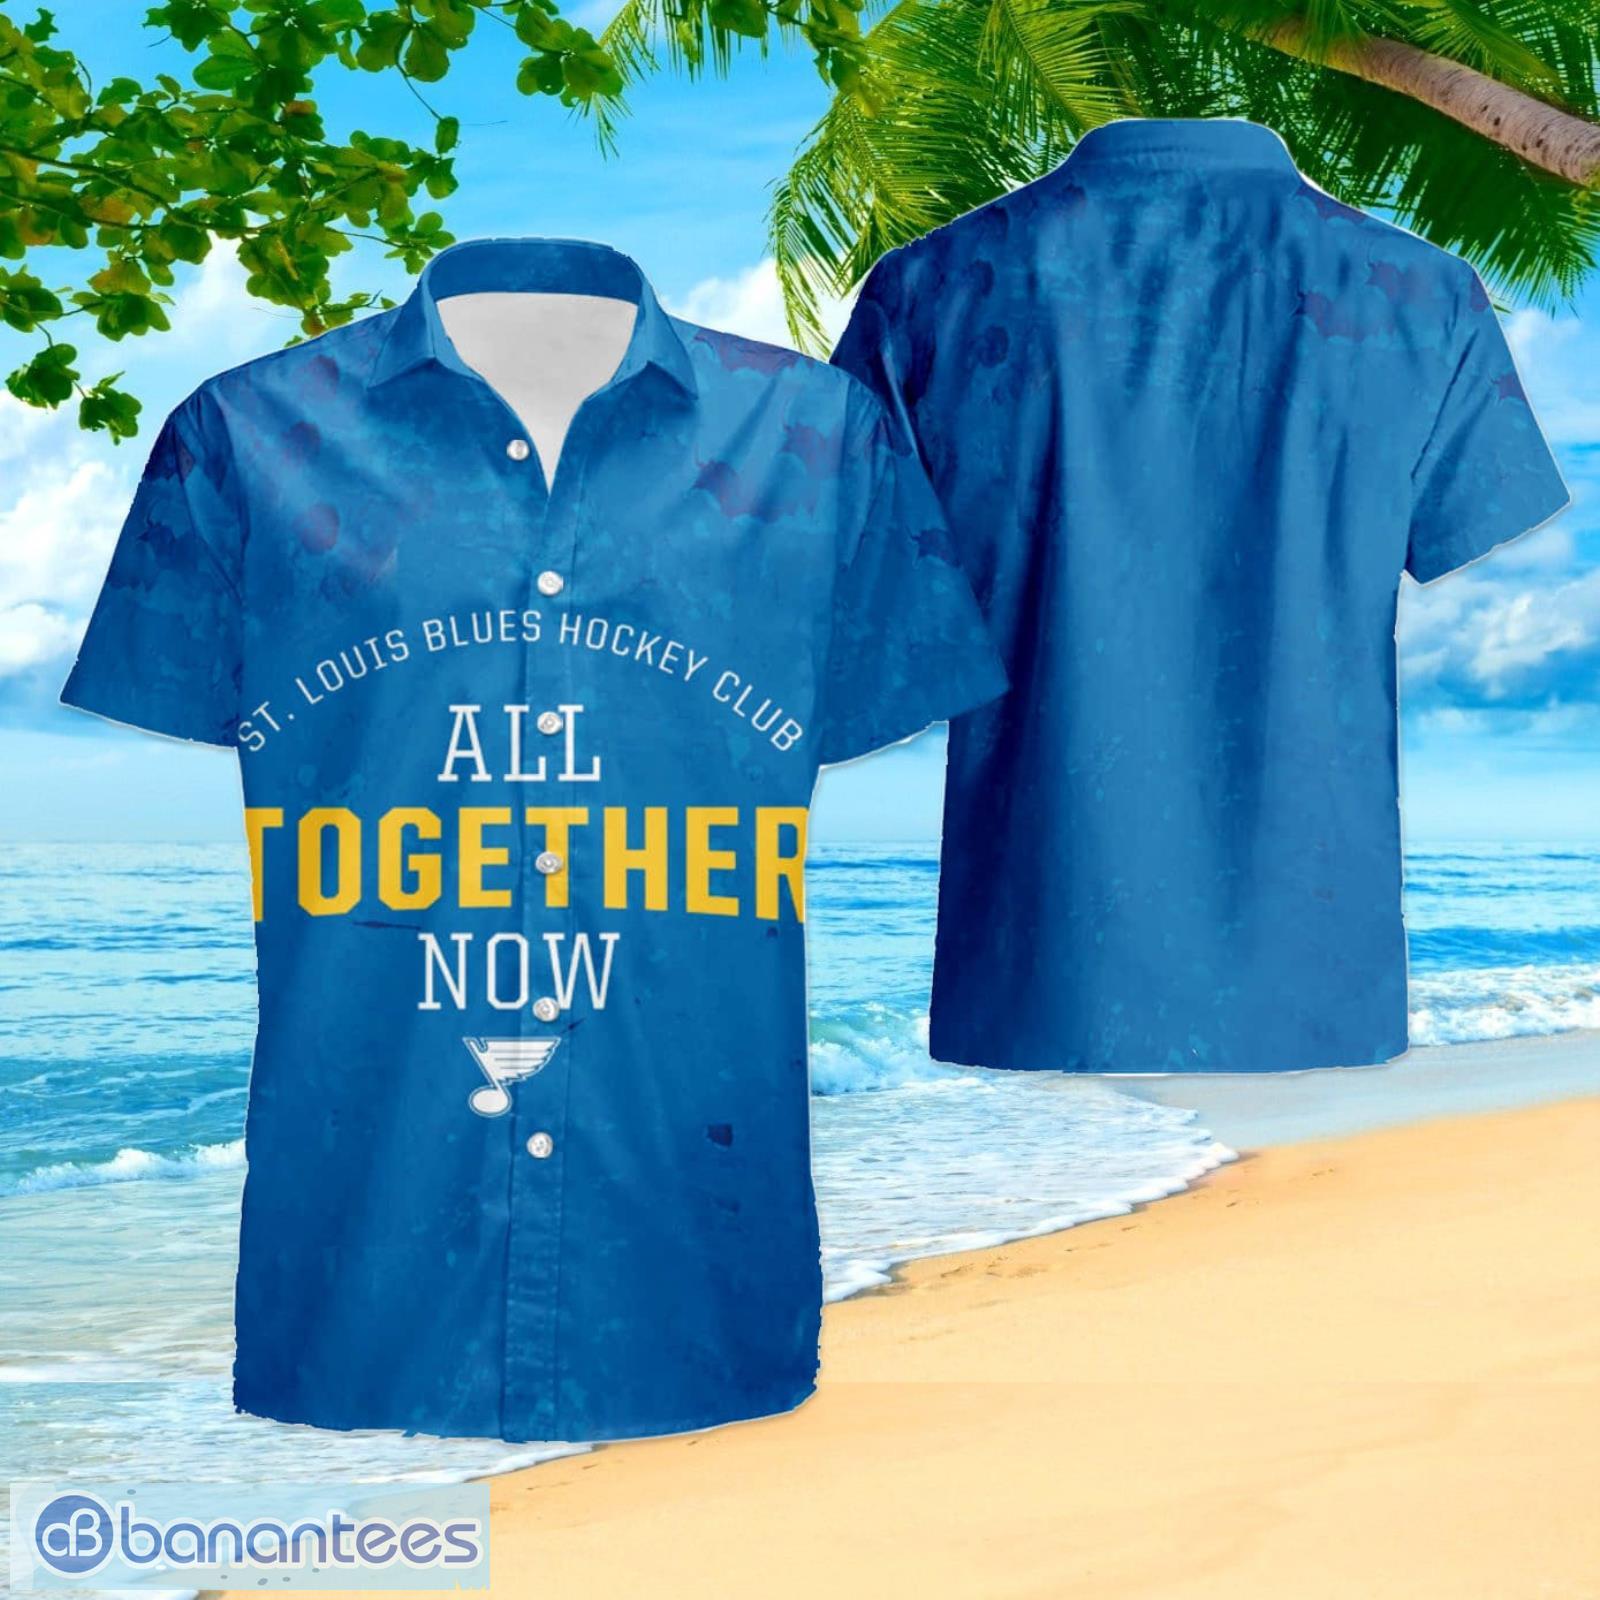 Nhl Tempting St Louis Blues Hockey Club All Together Now Summer Hawaiian Shirt And Shorts Product Photo 1